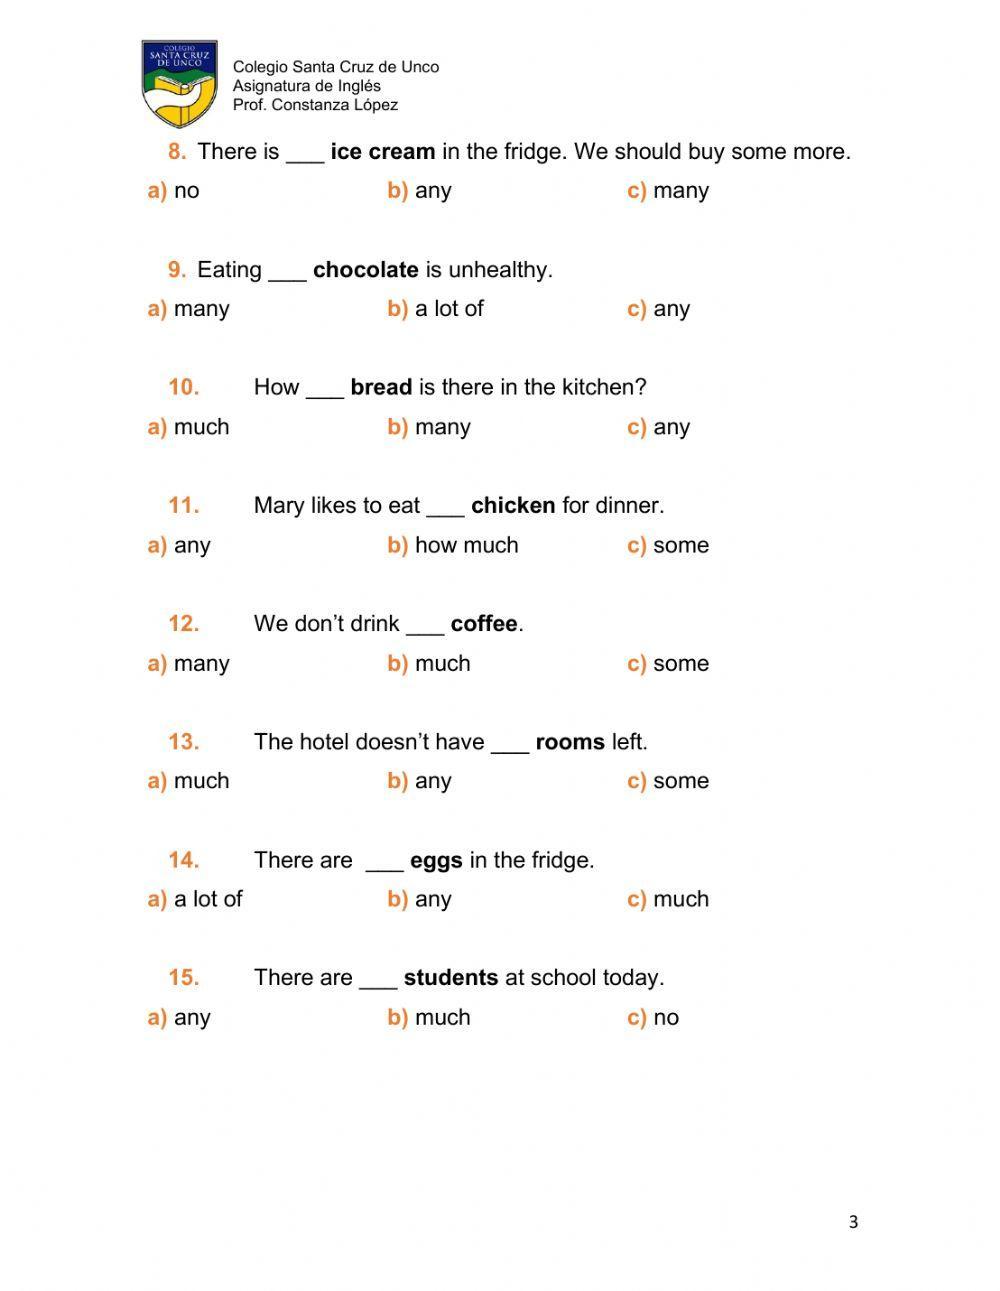 Countable-Uncountable nouns and a lot of-no (2)